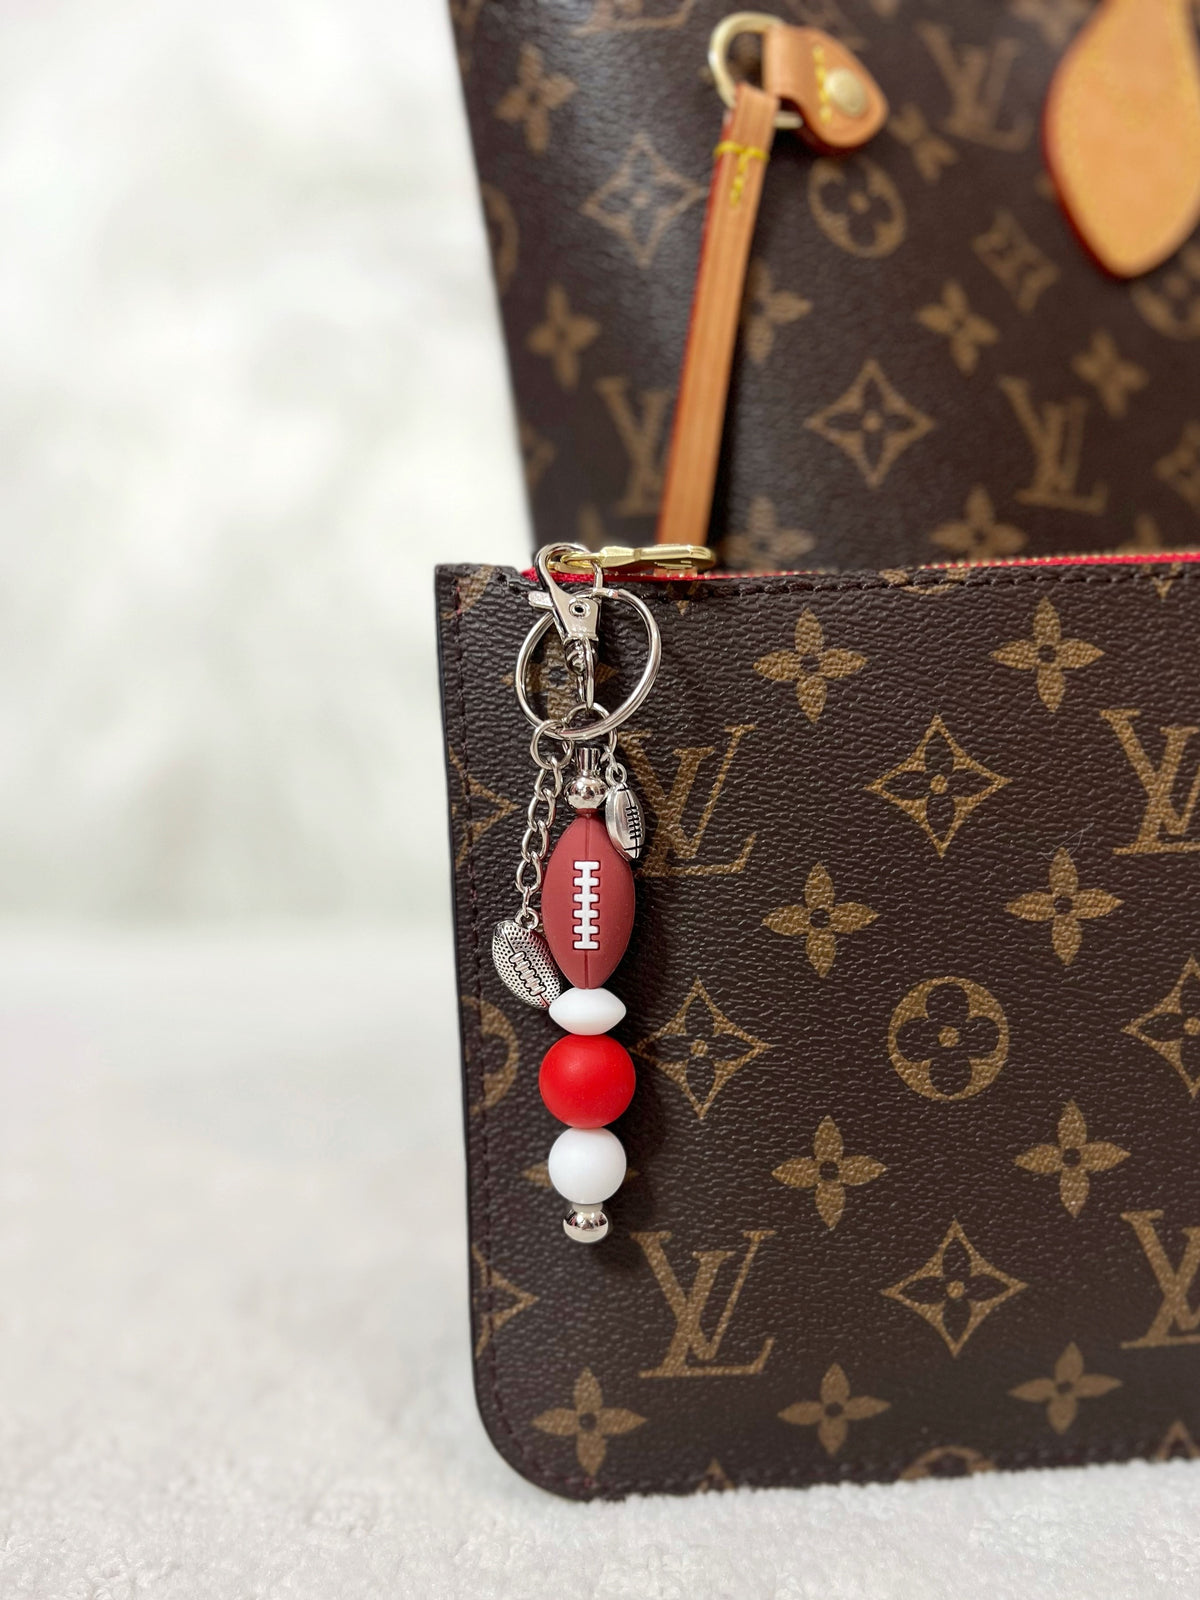 Silicone Football Keychain Purse Charm Zipper Pull with 360 degree swivel lobster clasp, keyring & chain, and bead bar. Personalize Customize with team colors for any football team